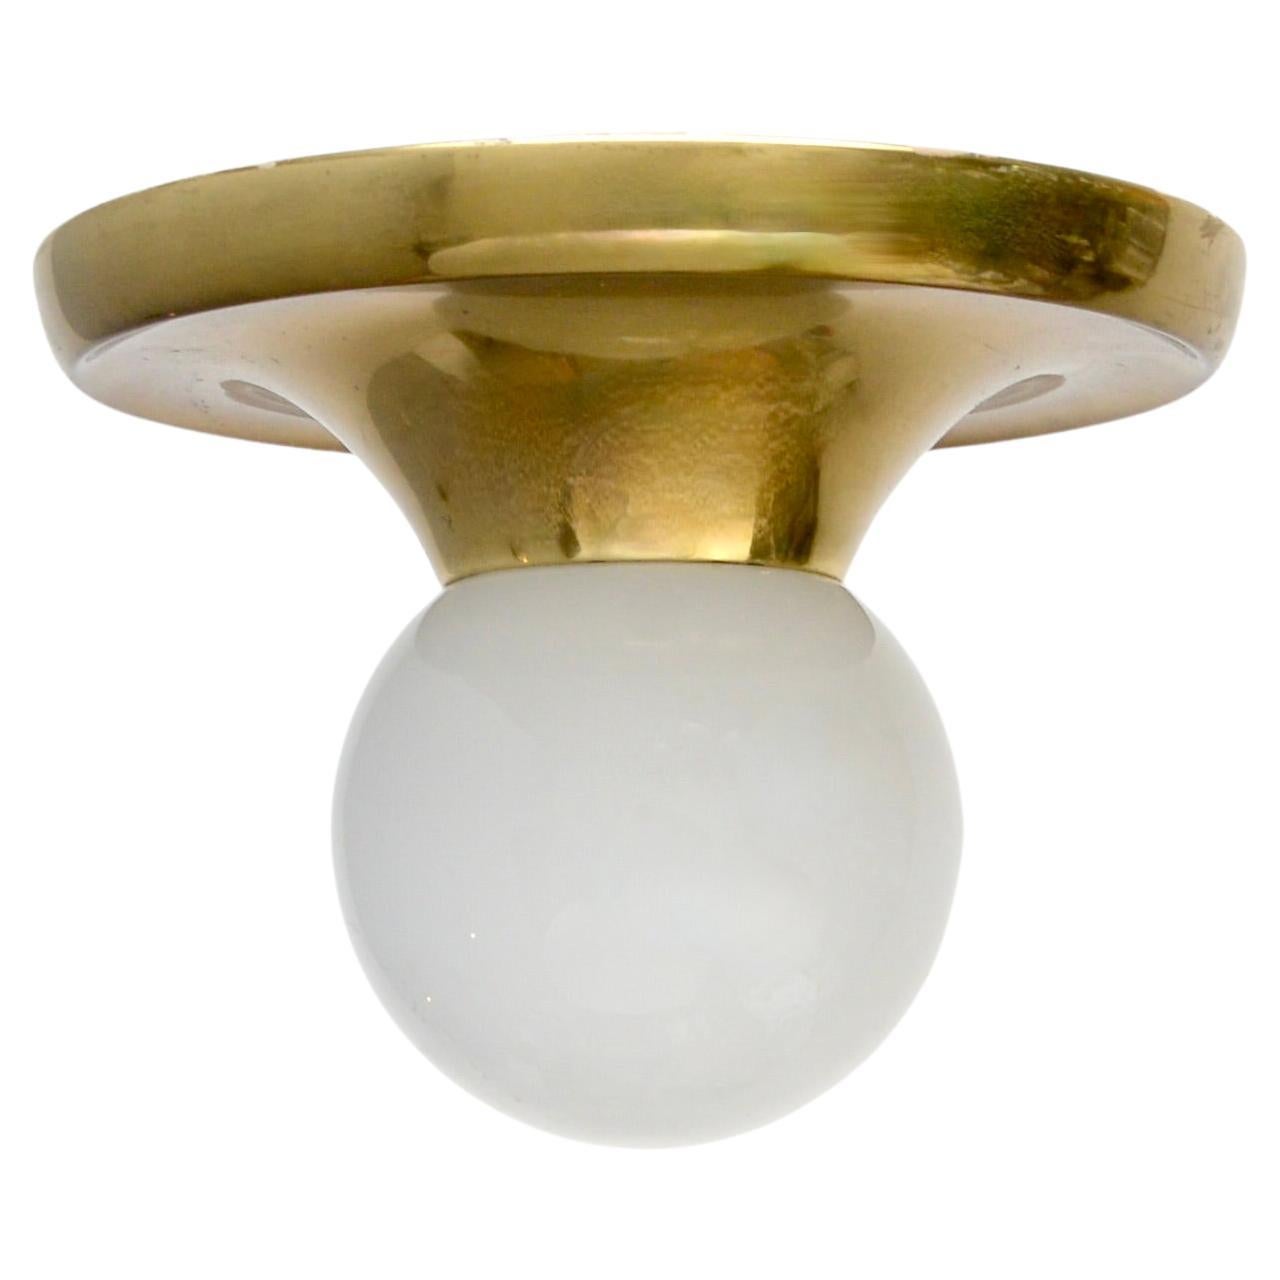 From the period 2 midcentury flush mounts by Achille Castiglioni from Italy, with original brass and glass finish. Finishes slightly differ between the two. Partially restored and rewired with 1 E26 medium based socket per flush mount. For use in